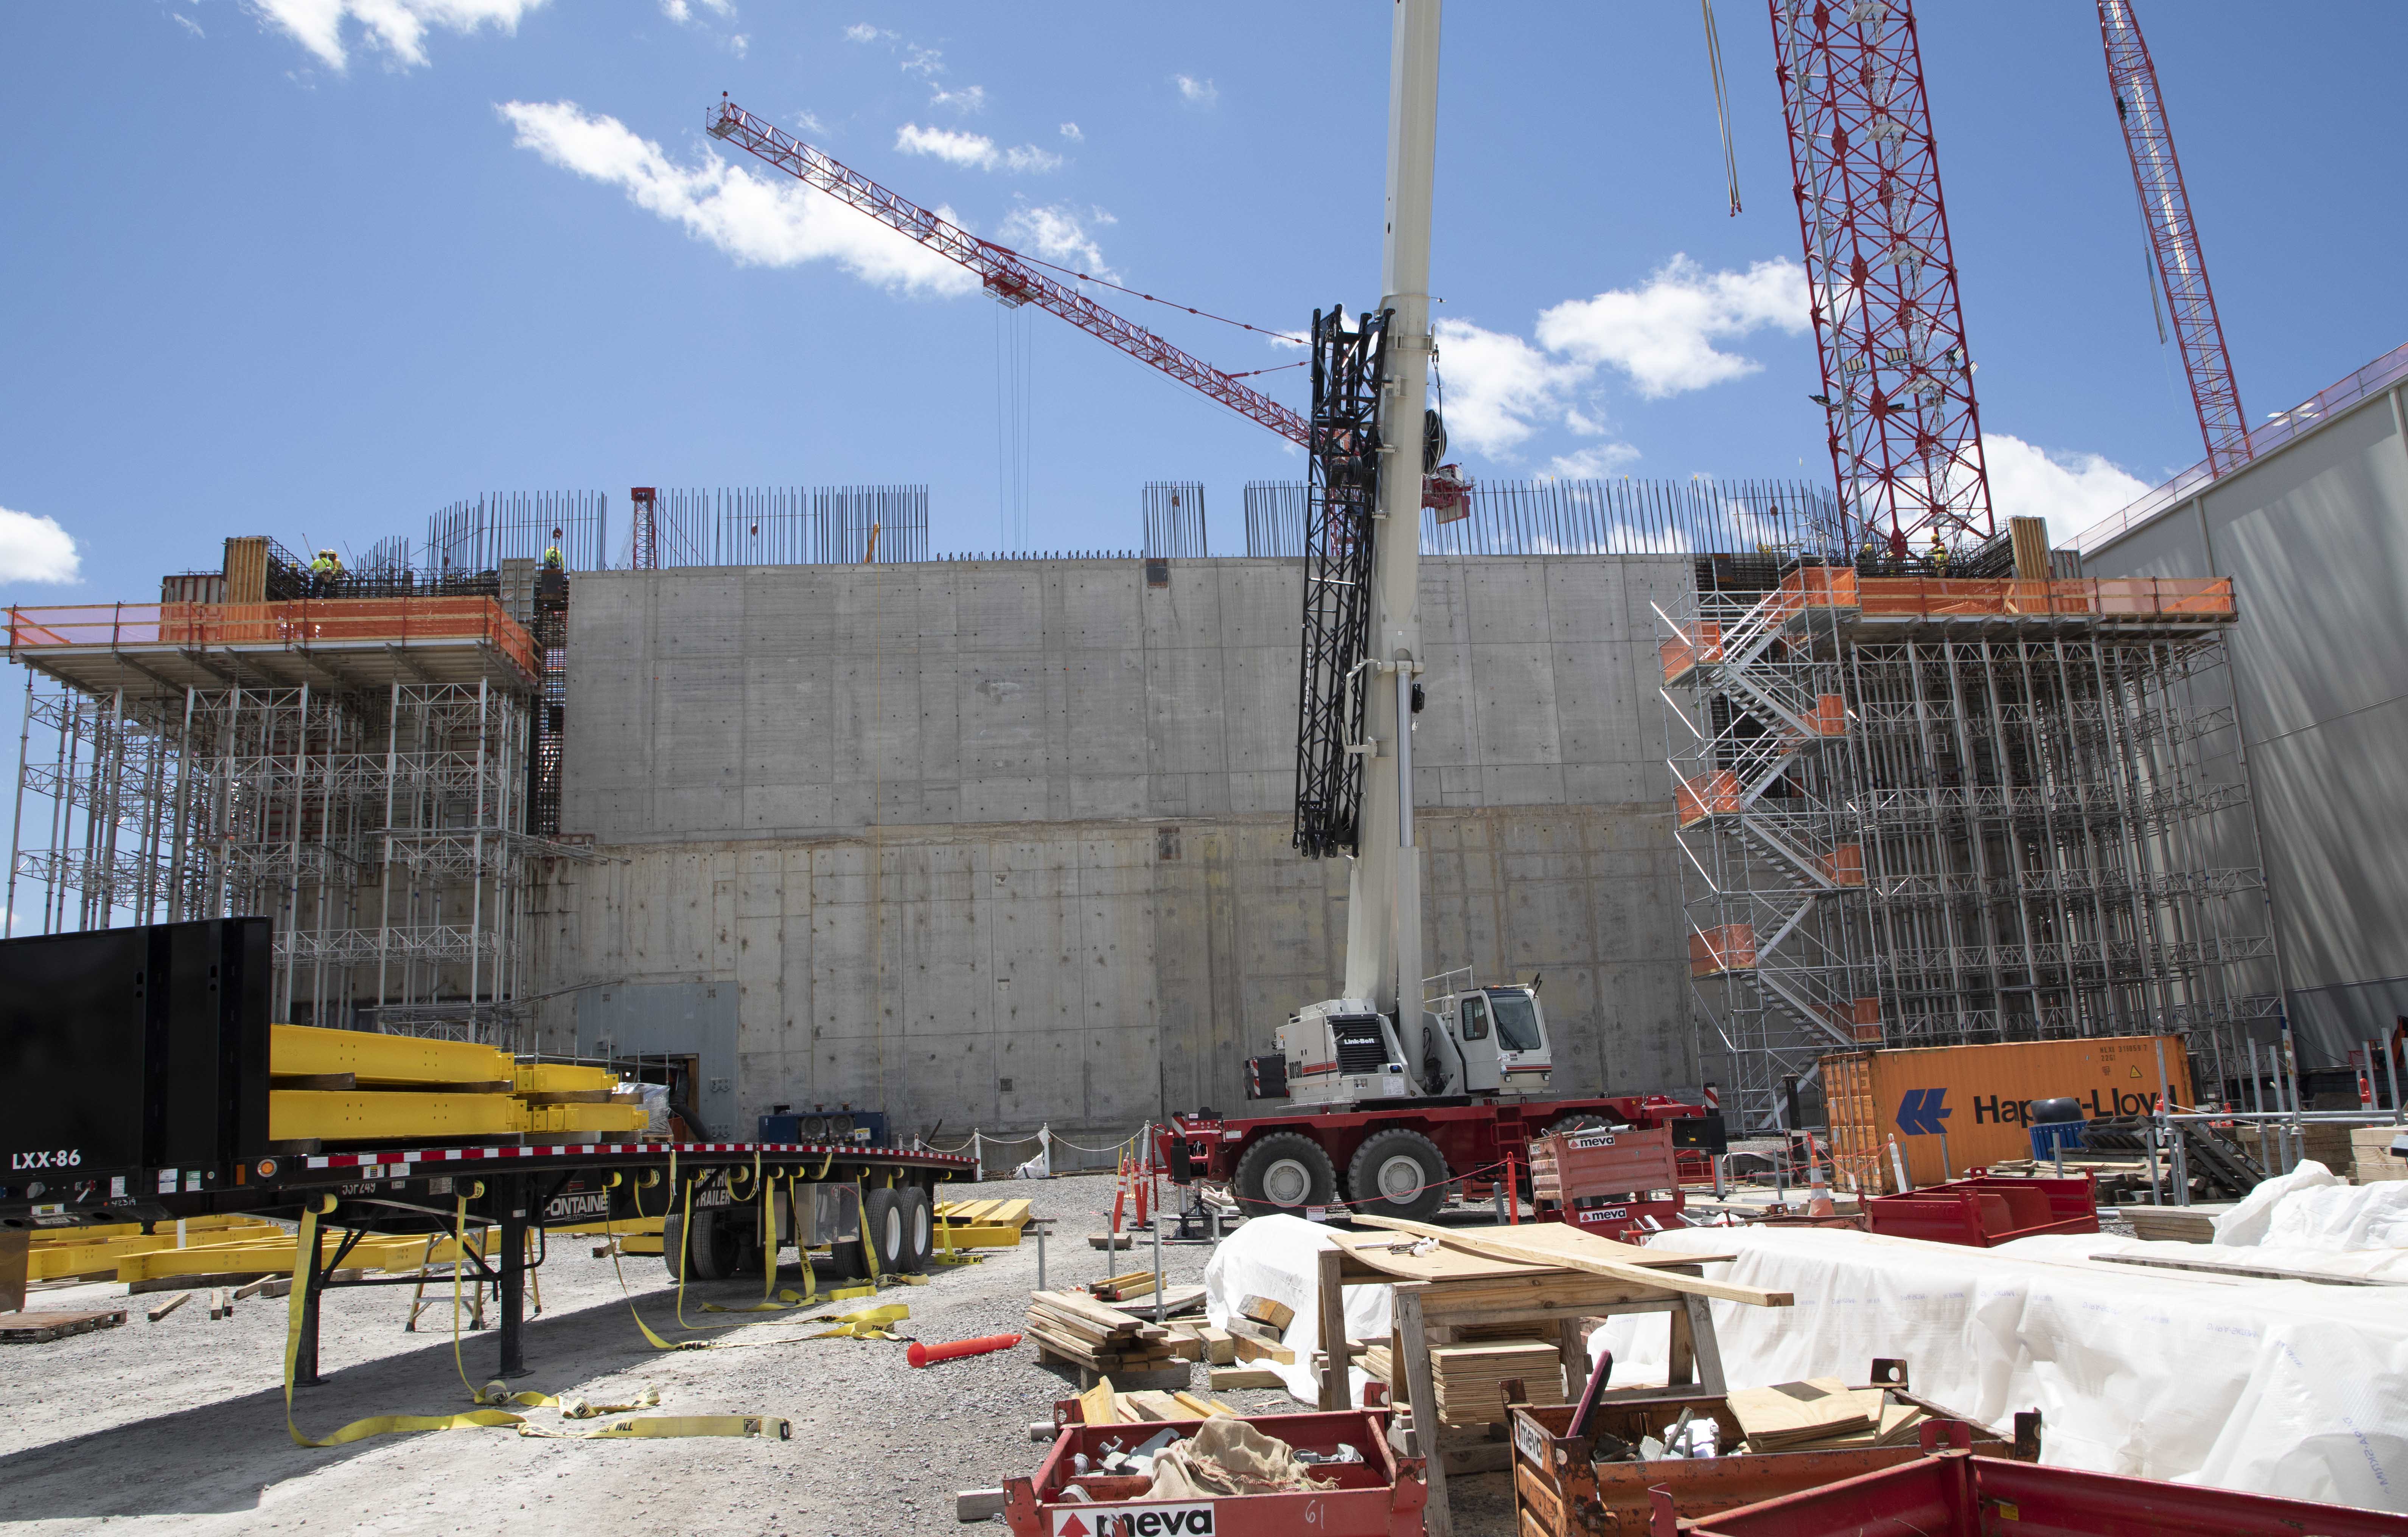 The UPF Project completed 7 Main Process Building (MPB) Concrete Wall Placements in May